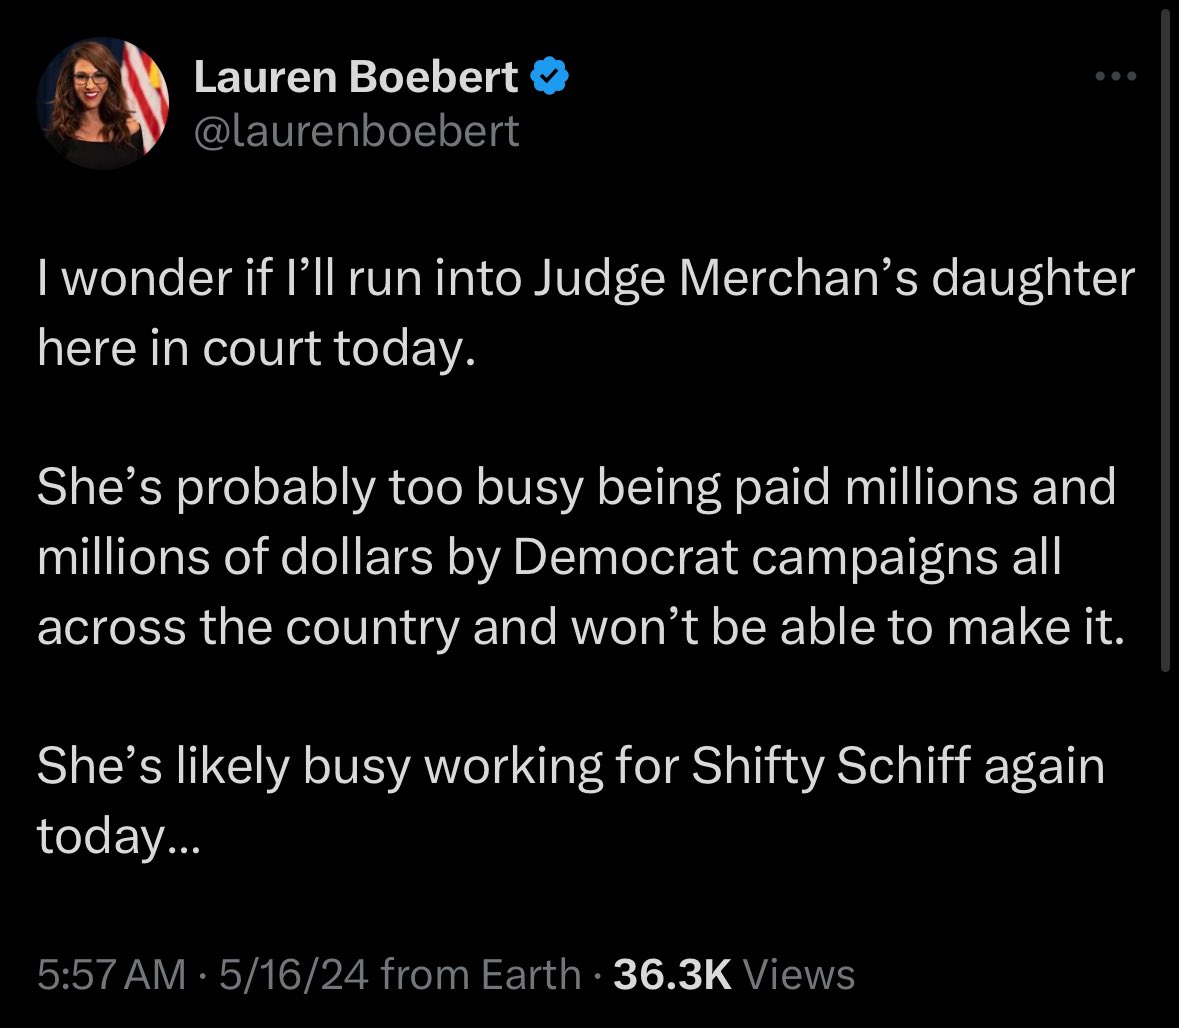 Lauren Boebert can’t be bothered to show up at her son’s court proceedings. But she is more than willing to show up at trump’s trial and smear Judge Merchan’s daughter. Utter. Fucking. Trash.